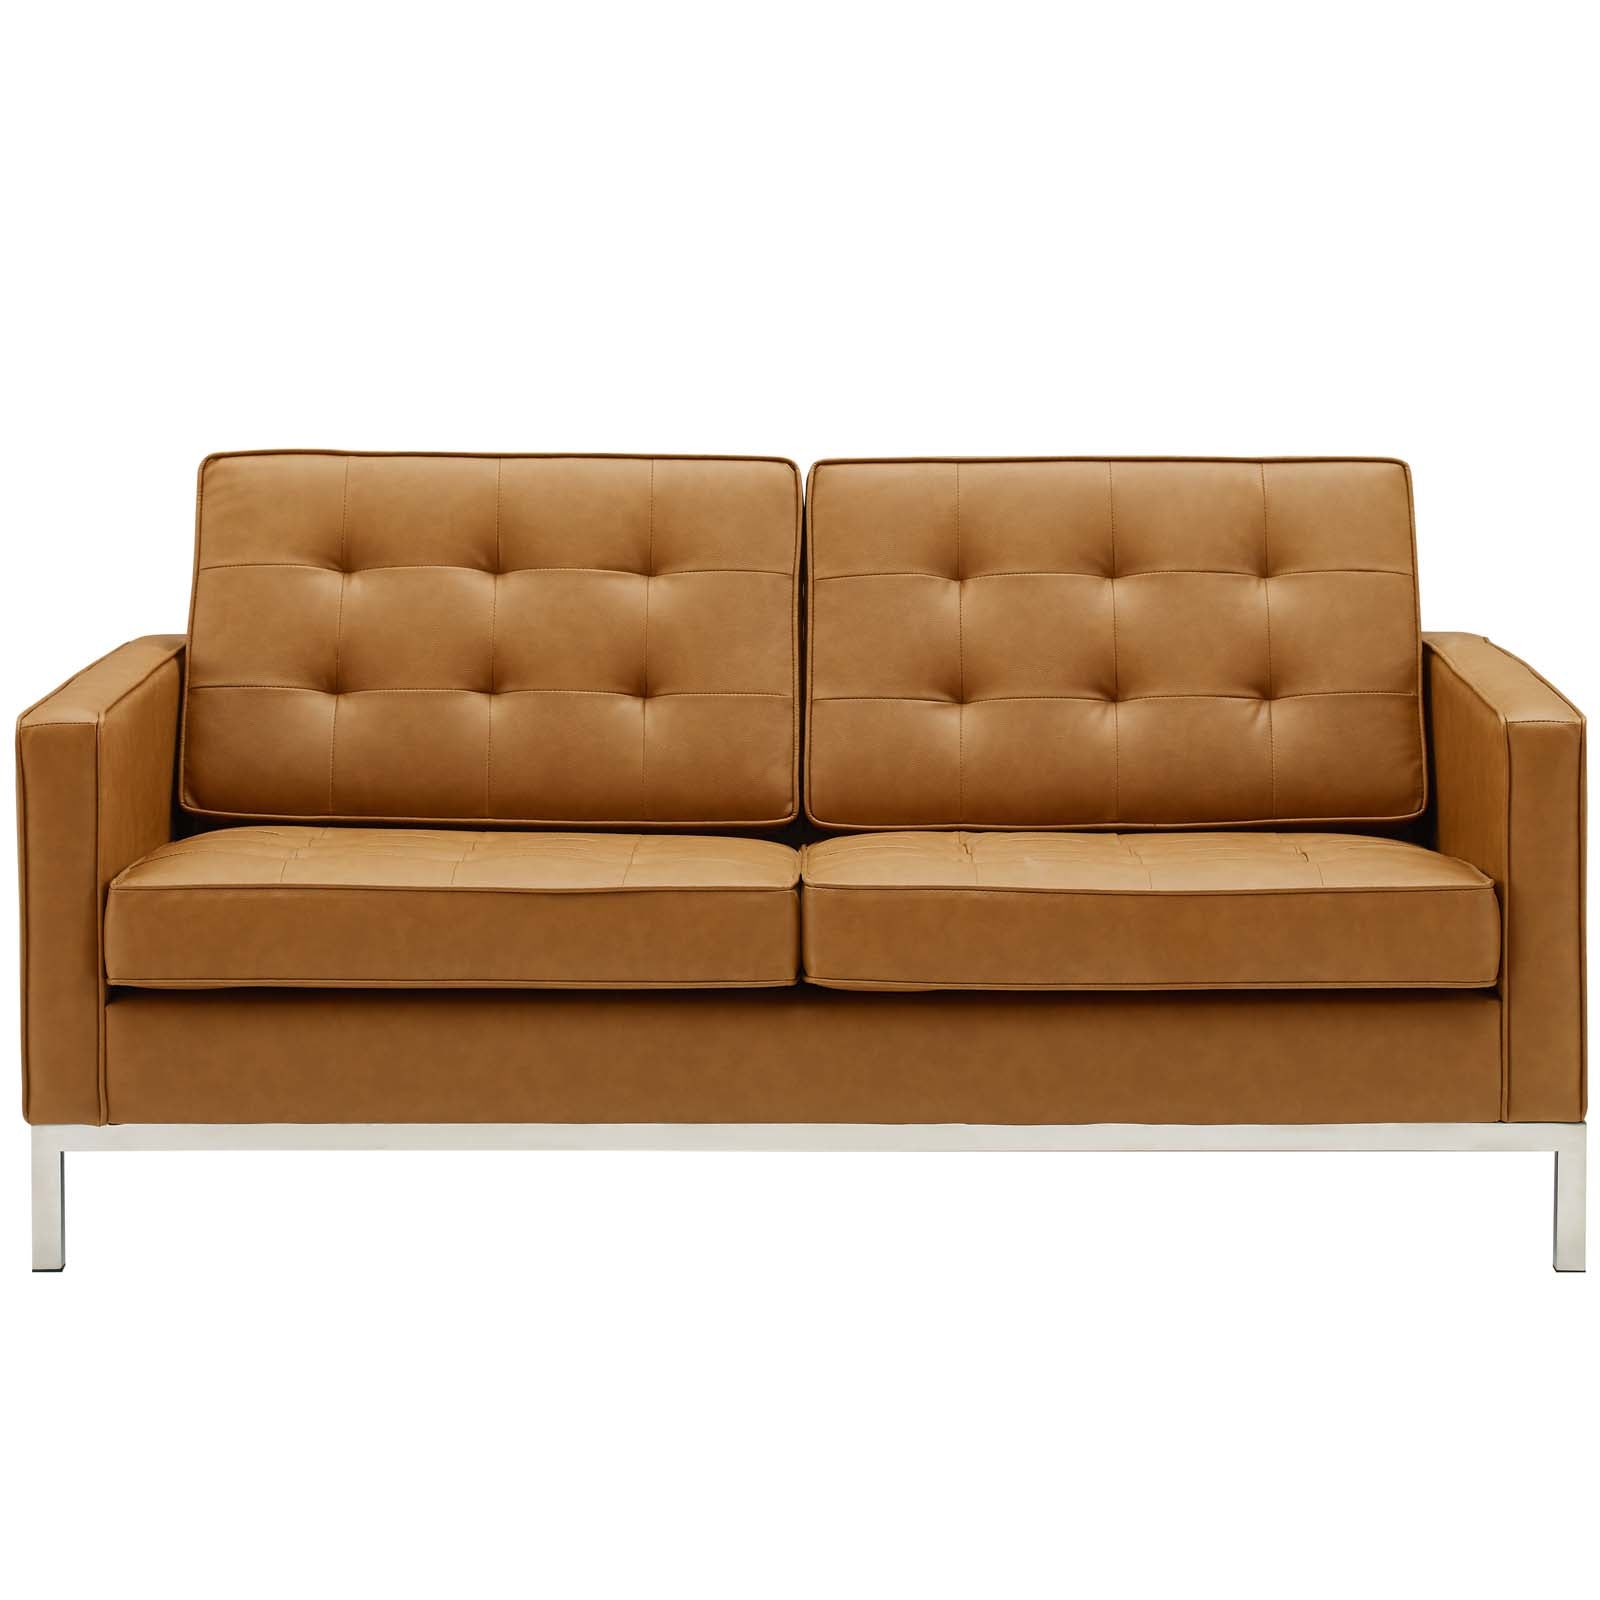 Loft Tufted Upholstered Faux Leather Loveseat - East Shore Modern Home Furnishings